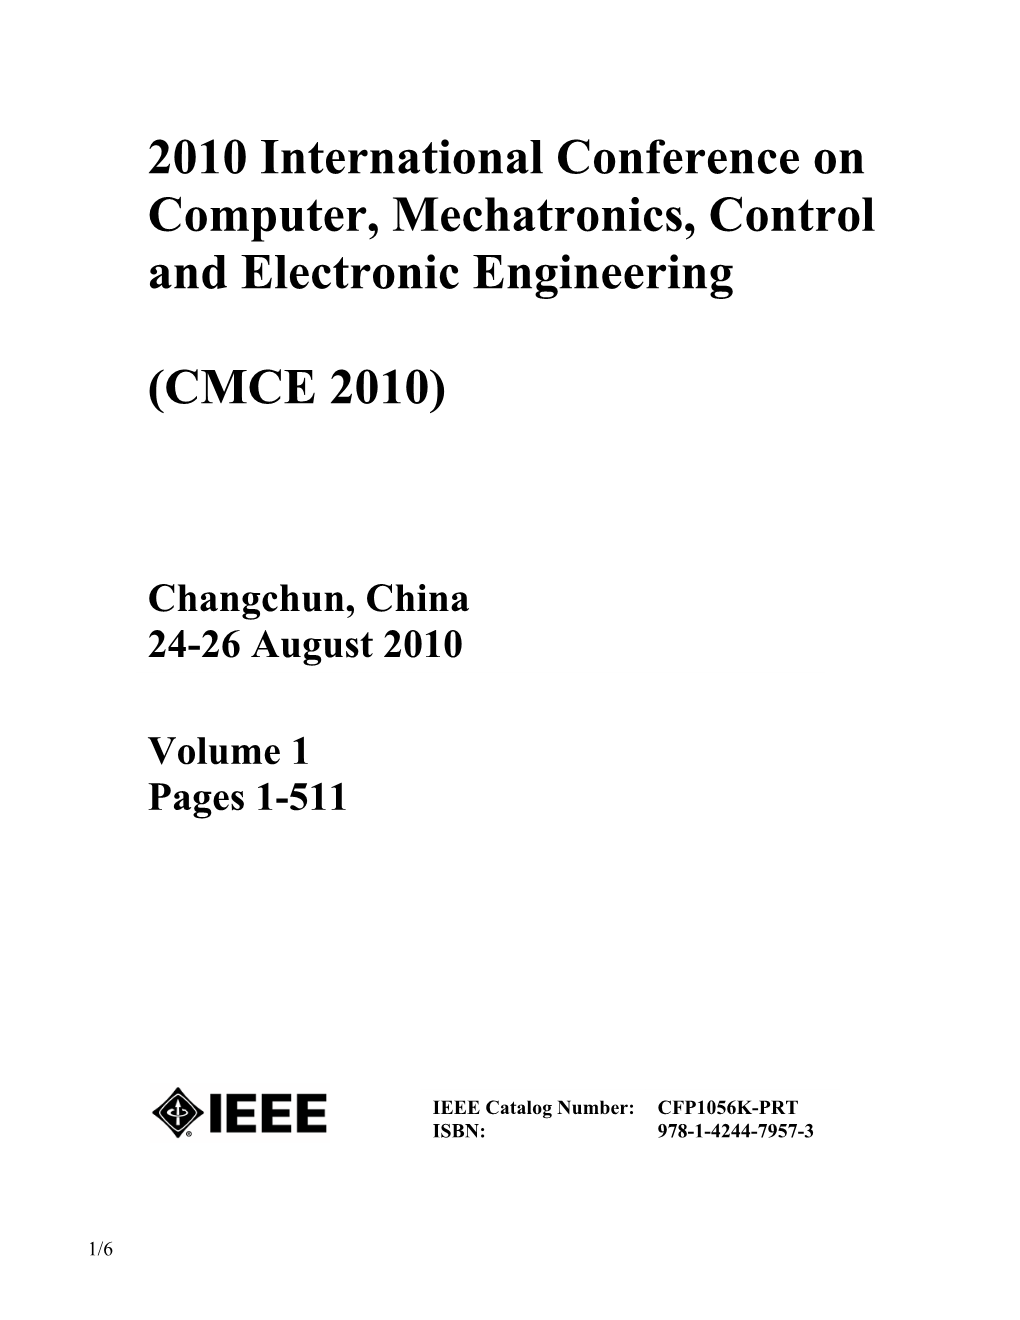 2010 International Conference on Computer, Mechatronics, Control and Electronic Engineering